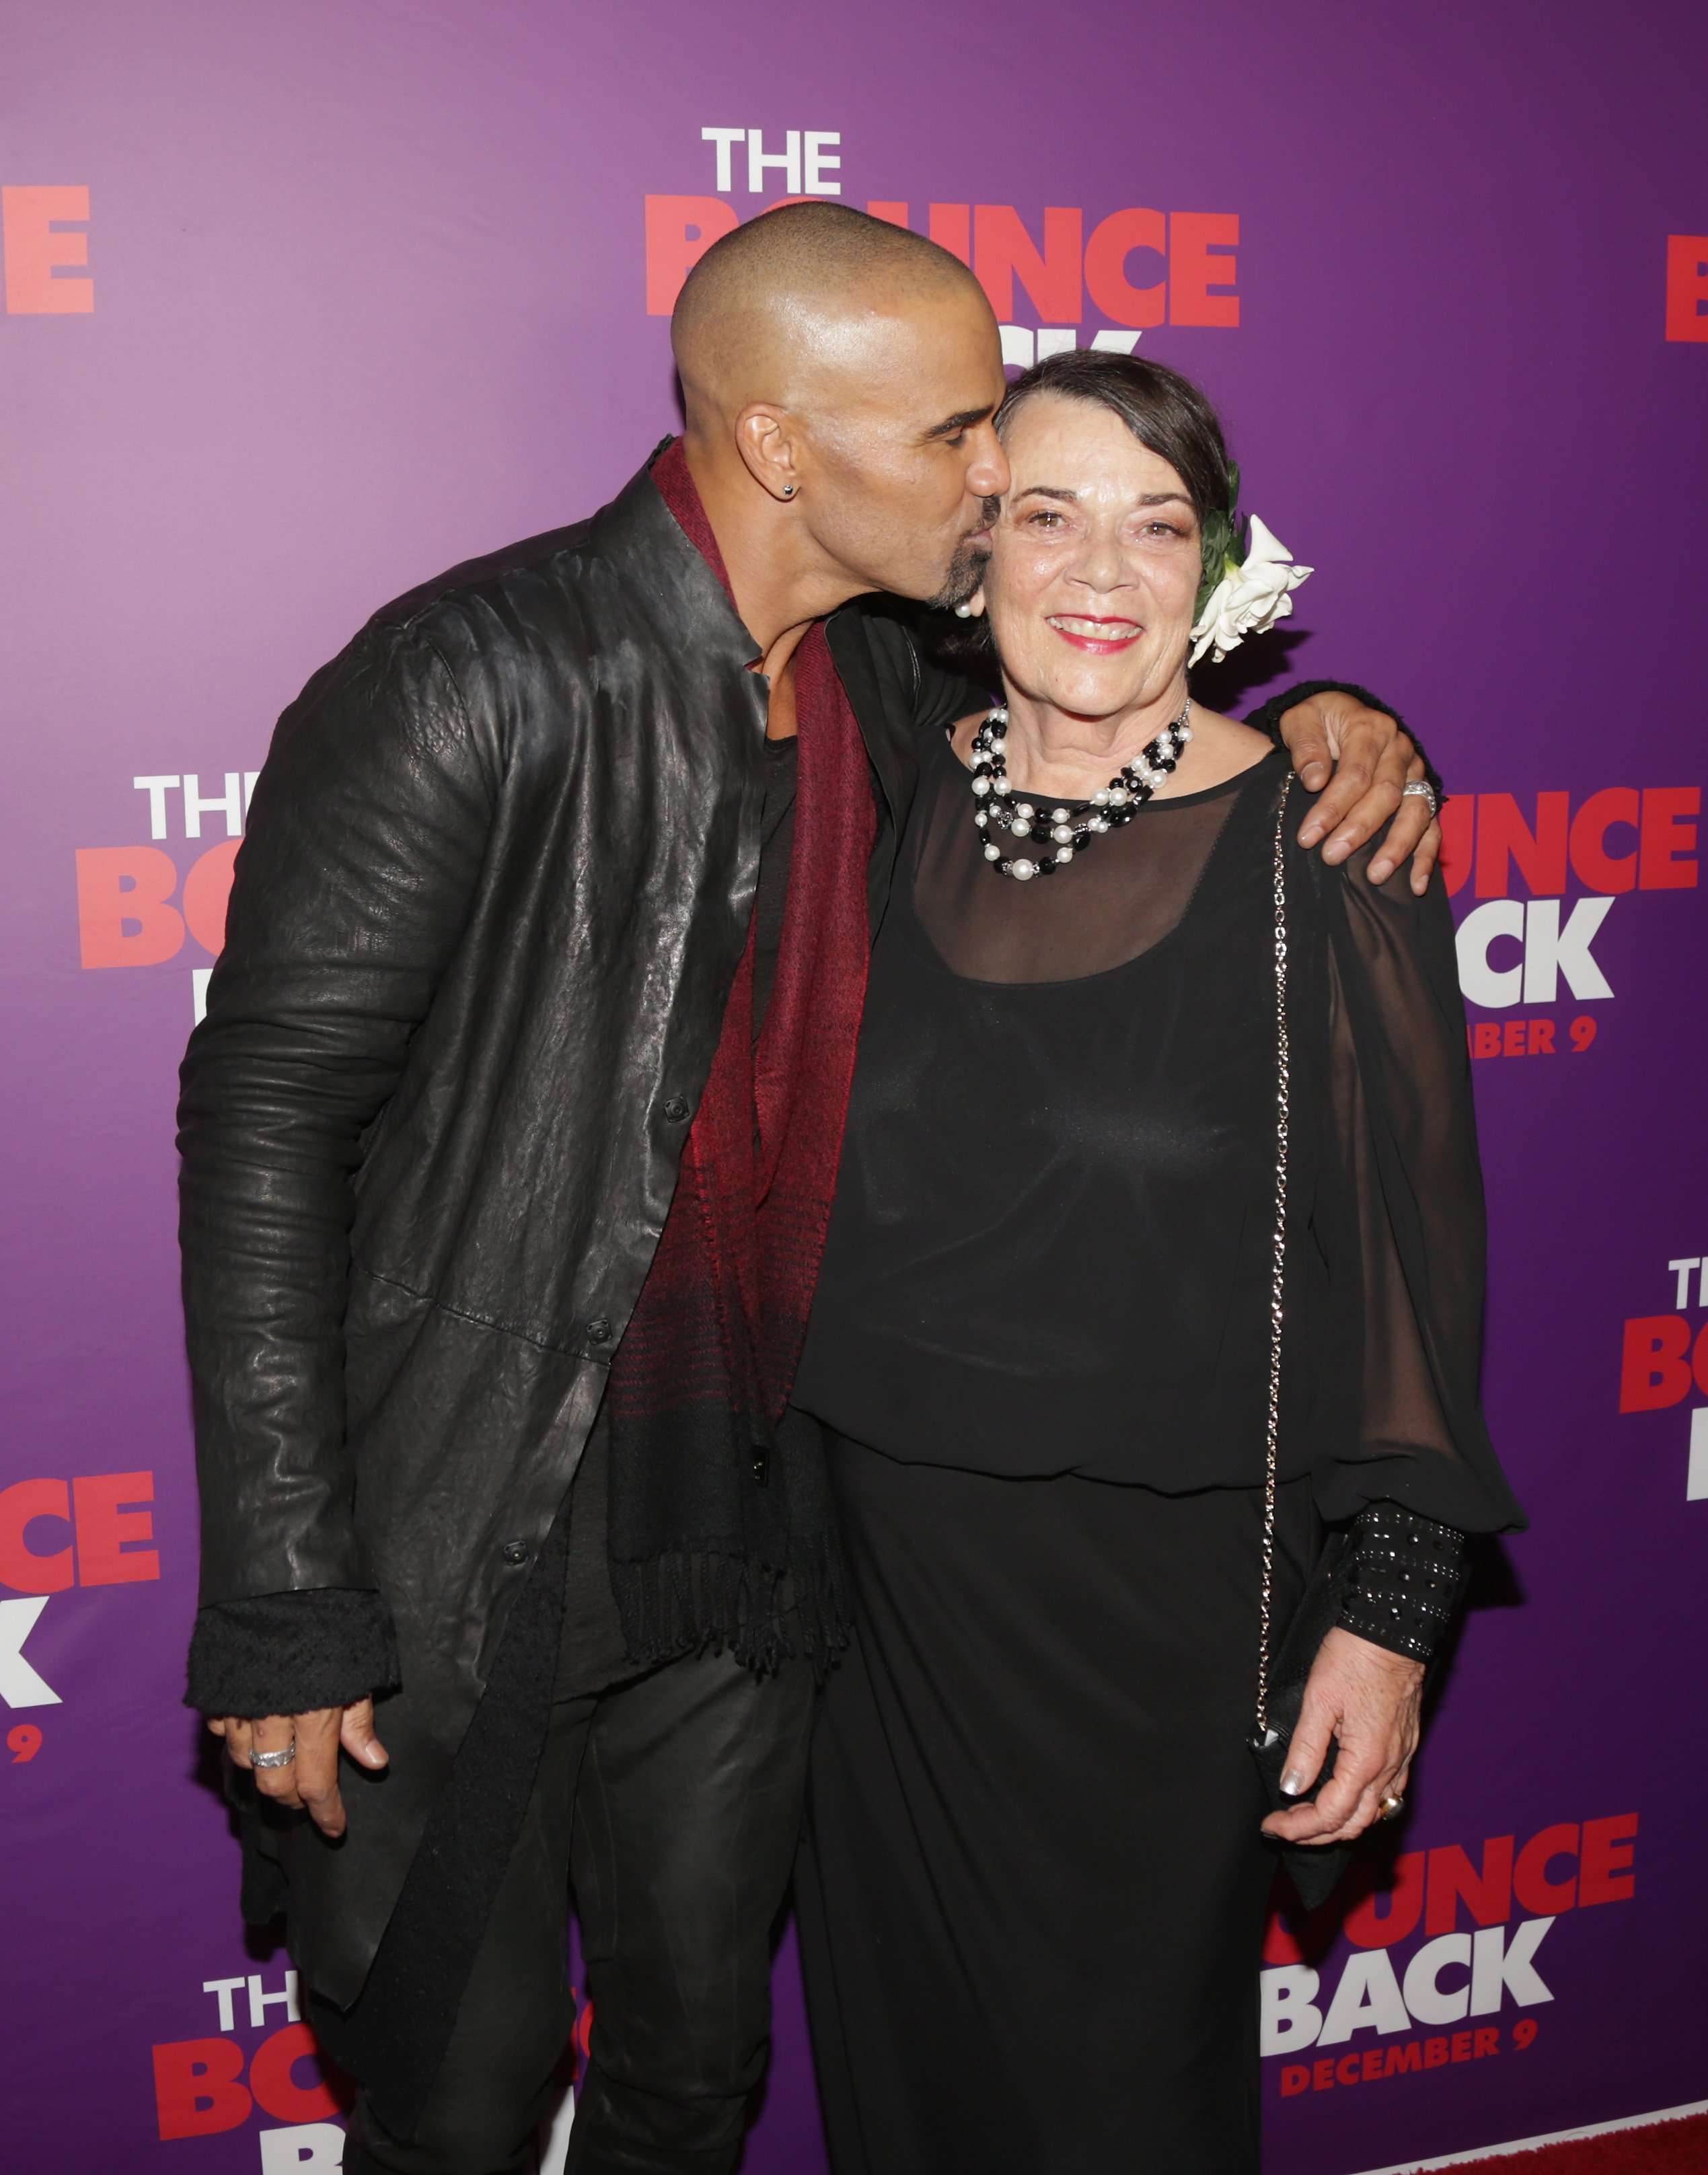 Shemar Moore and his mother Marilyn Wilson at the Premiere Of "The Bounce Back"on December 6, 2016 | Photo: GettyImages